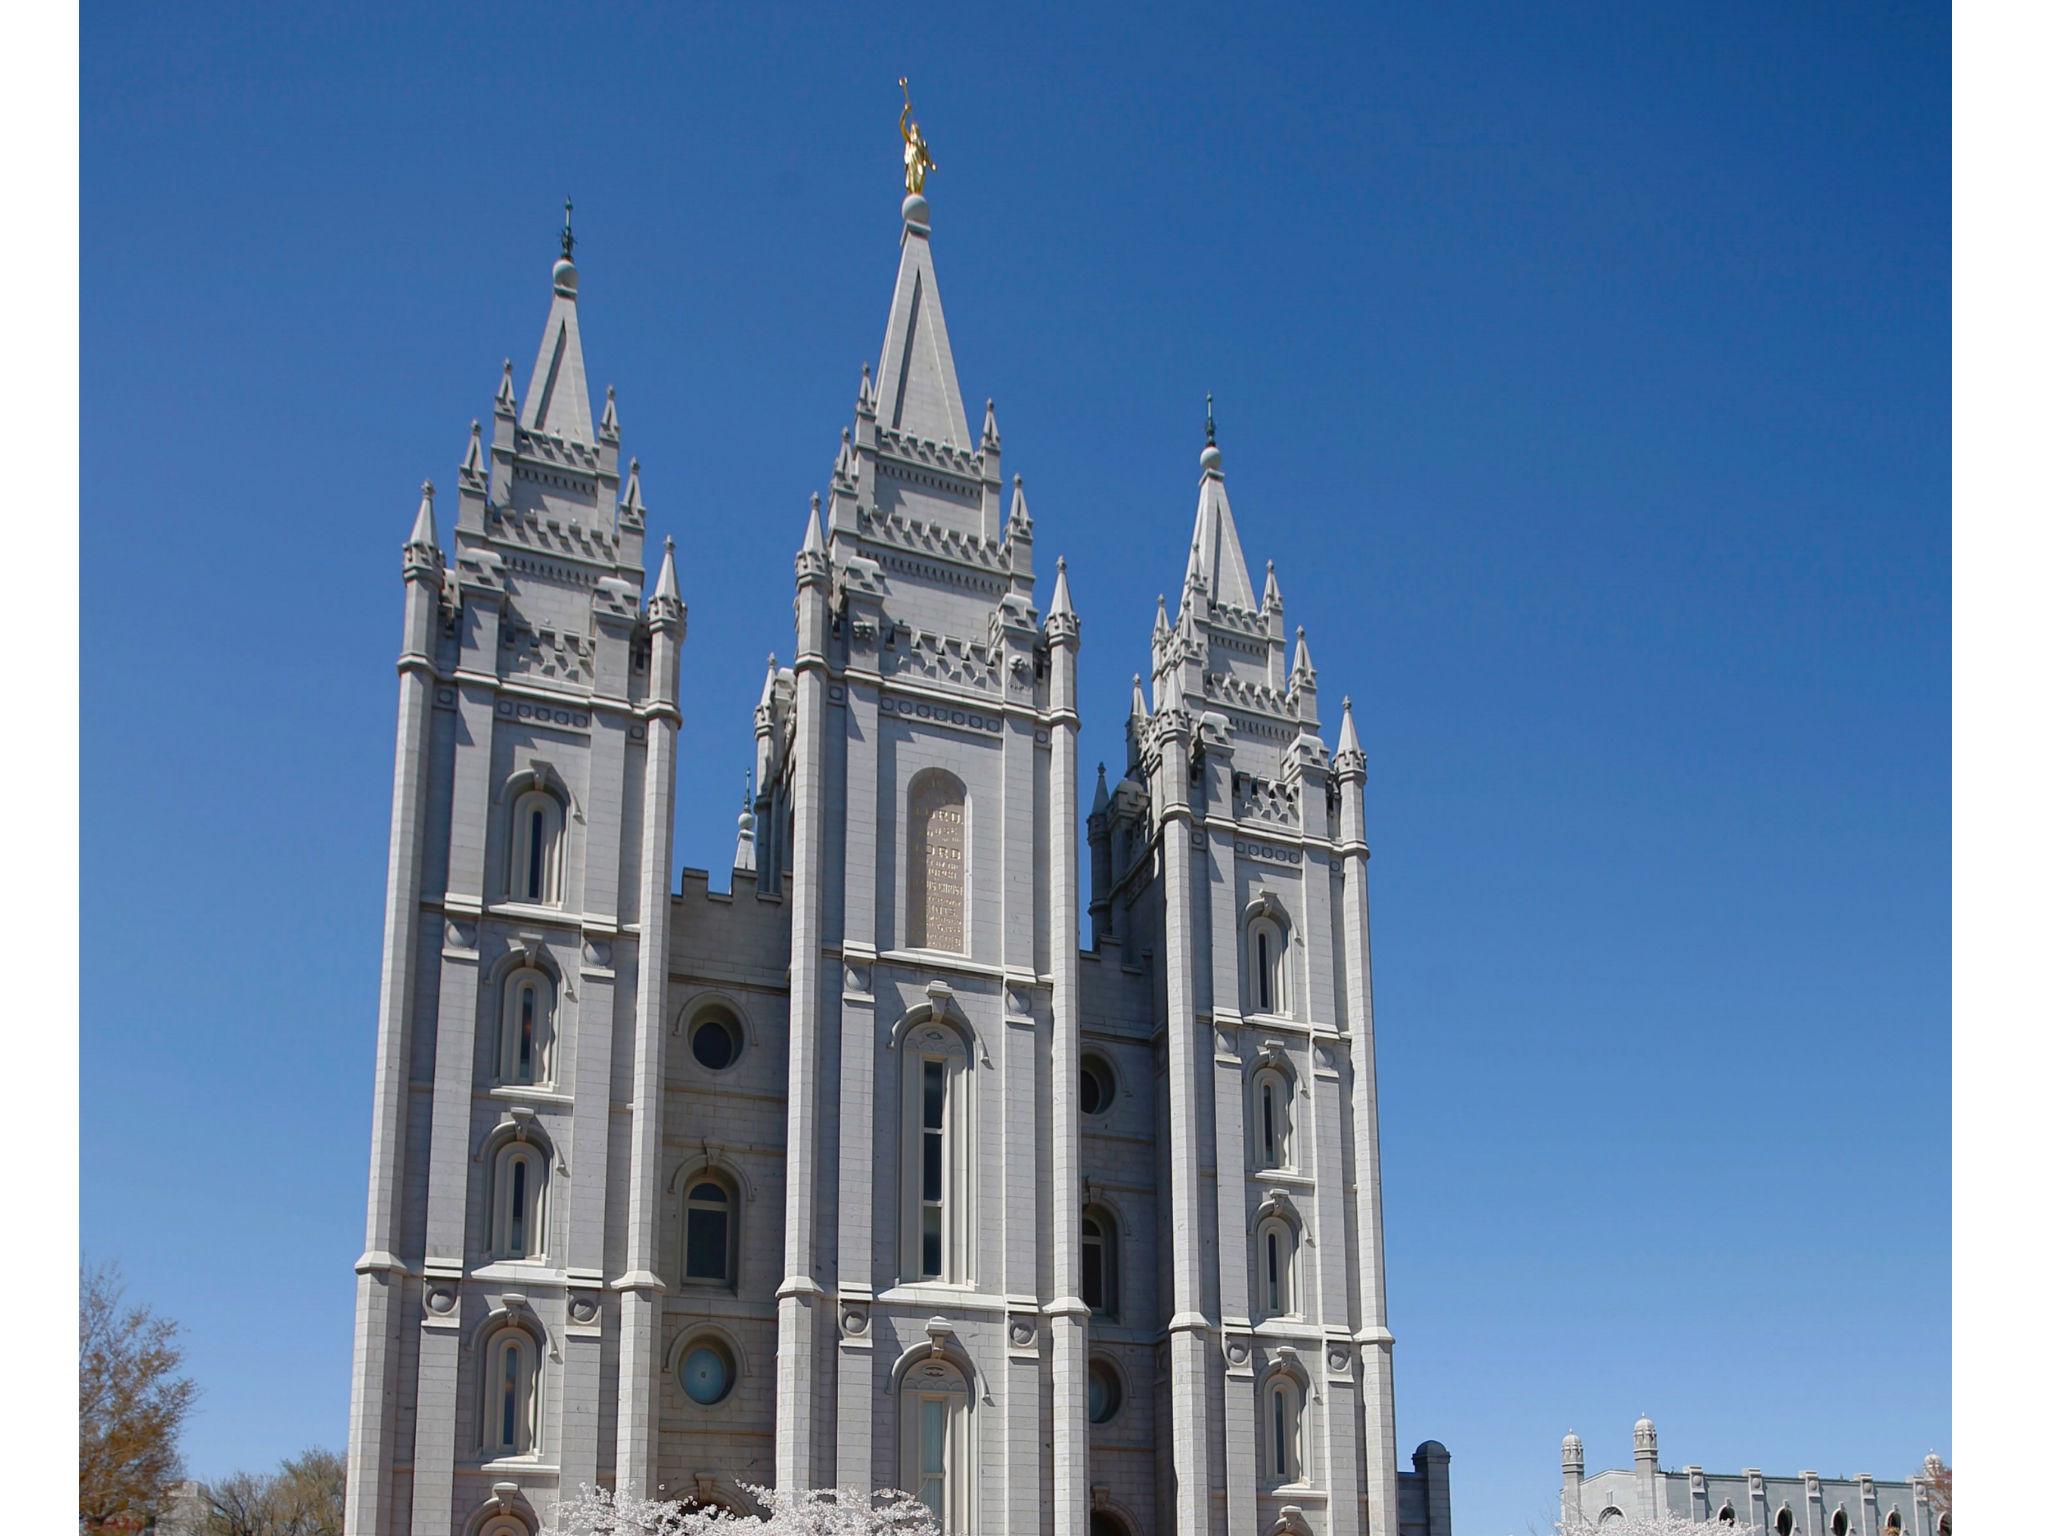 The LDS Church Temple at Temple Square, near where the leaders spoke